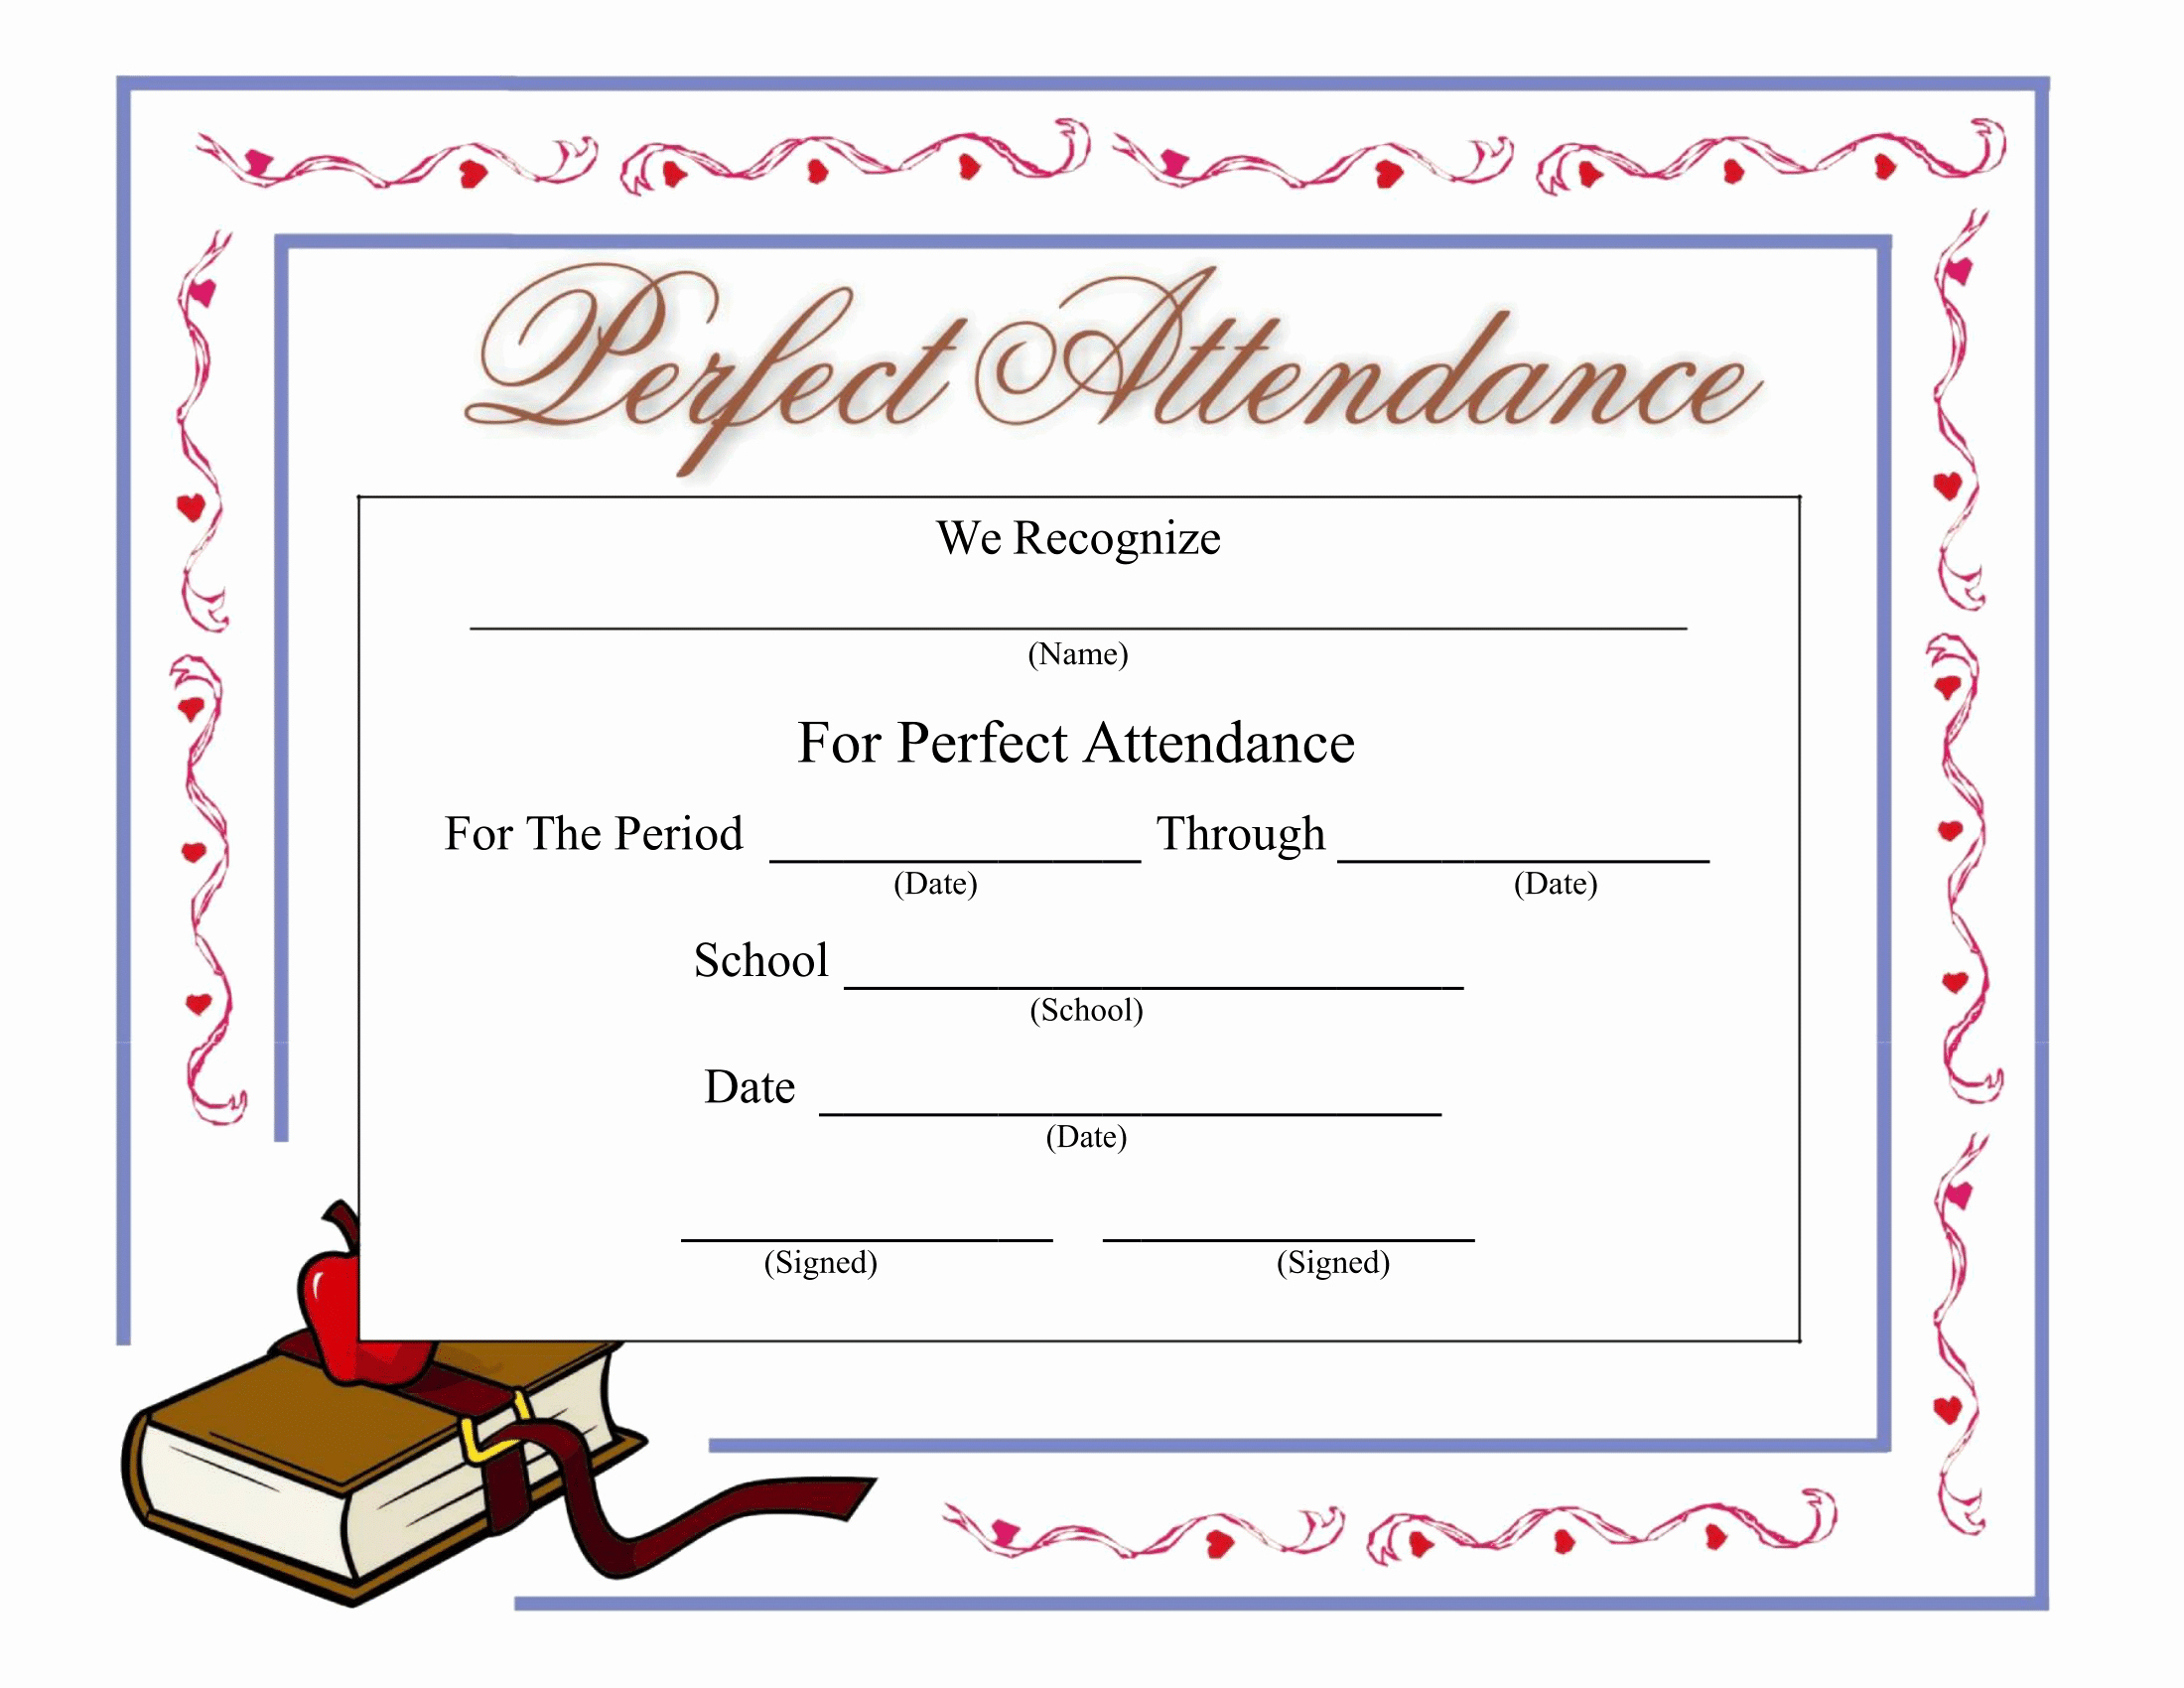 Perfect Attendance Certificate Template | Mathosproject with regard to Perfect Attendance Certificate Free Template